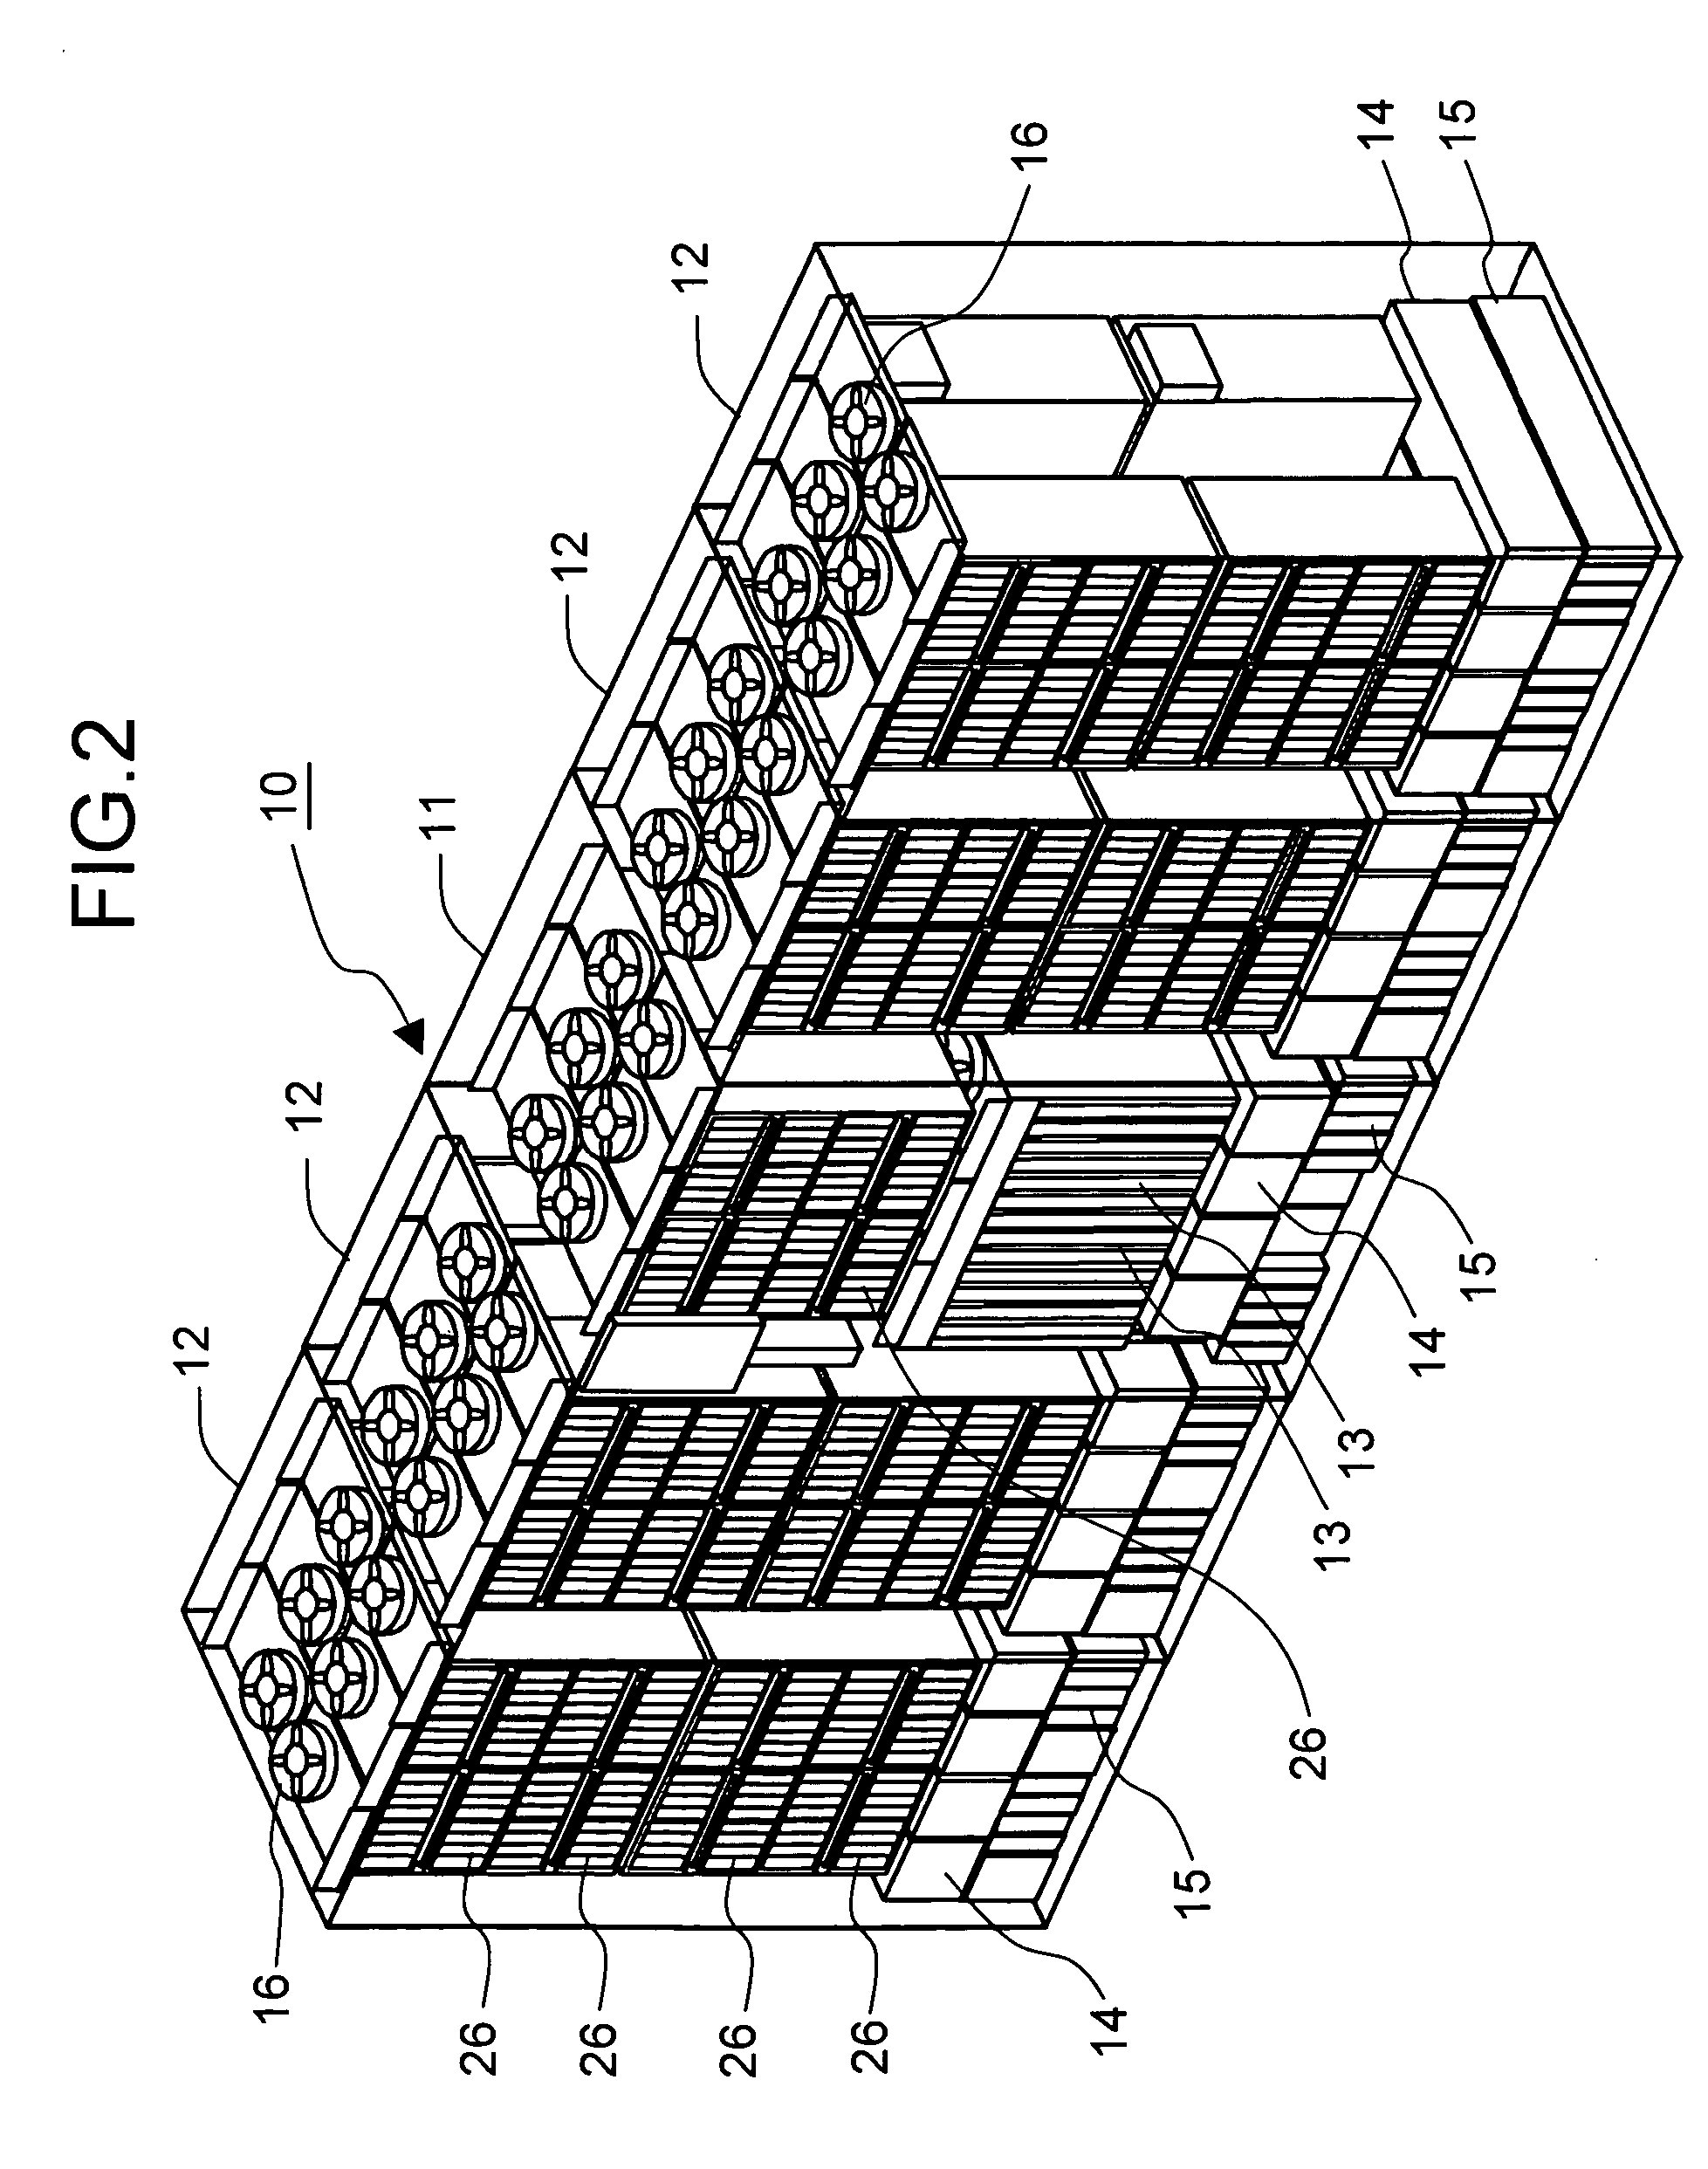 Storage device for monitoring the status of host devices and dynamically controlling priorities of the host devices based on the status